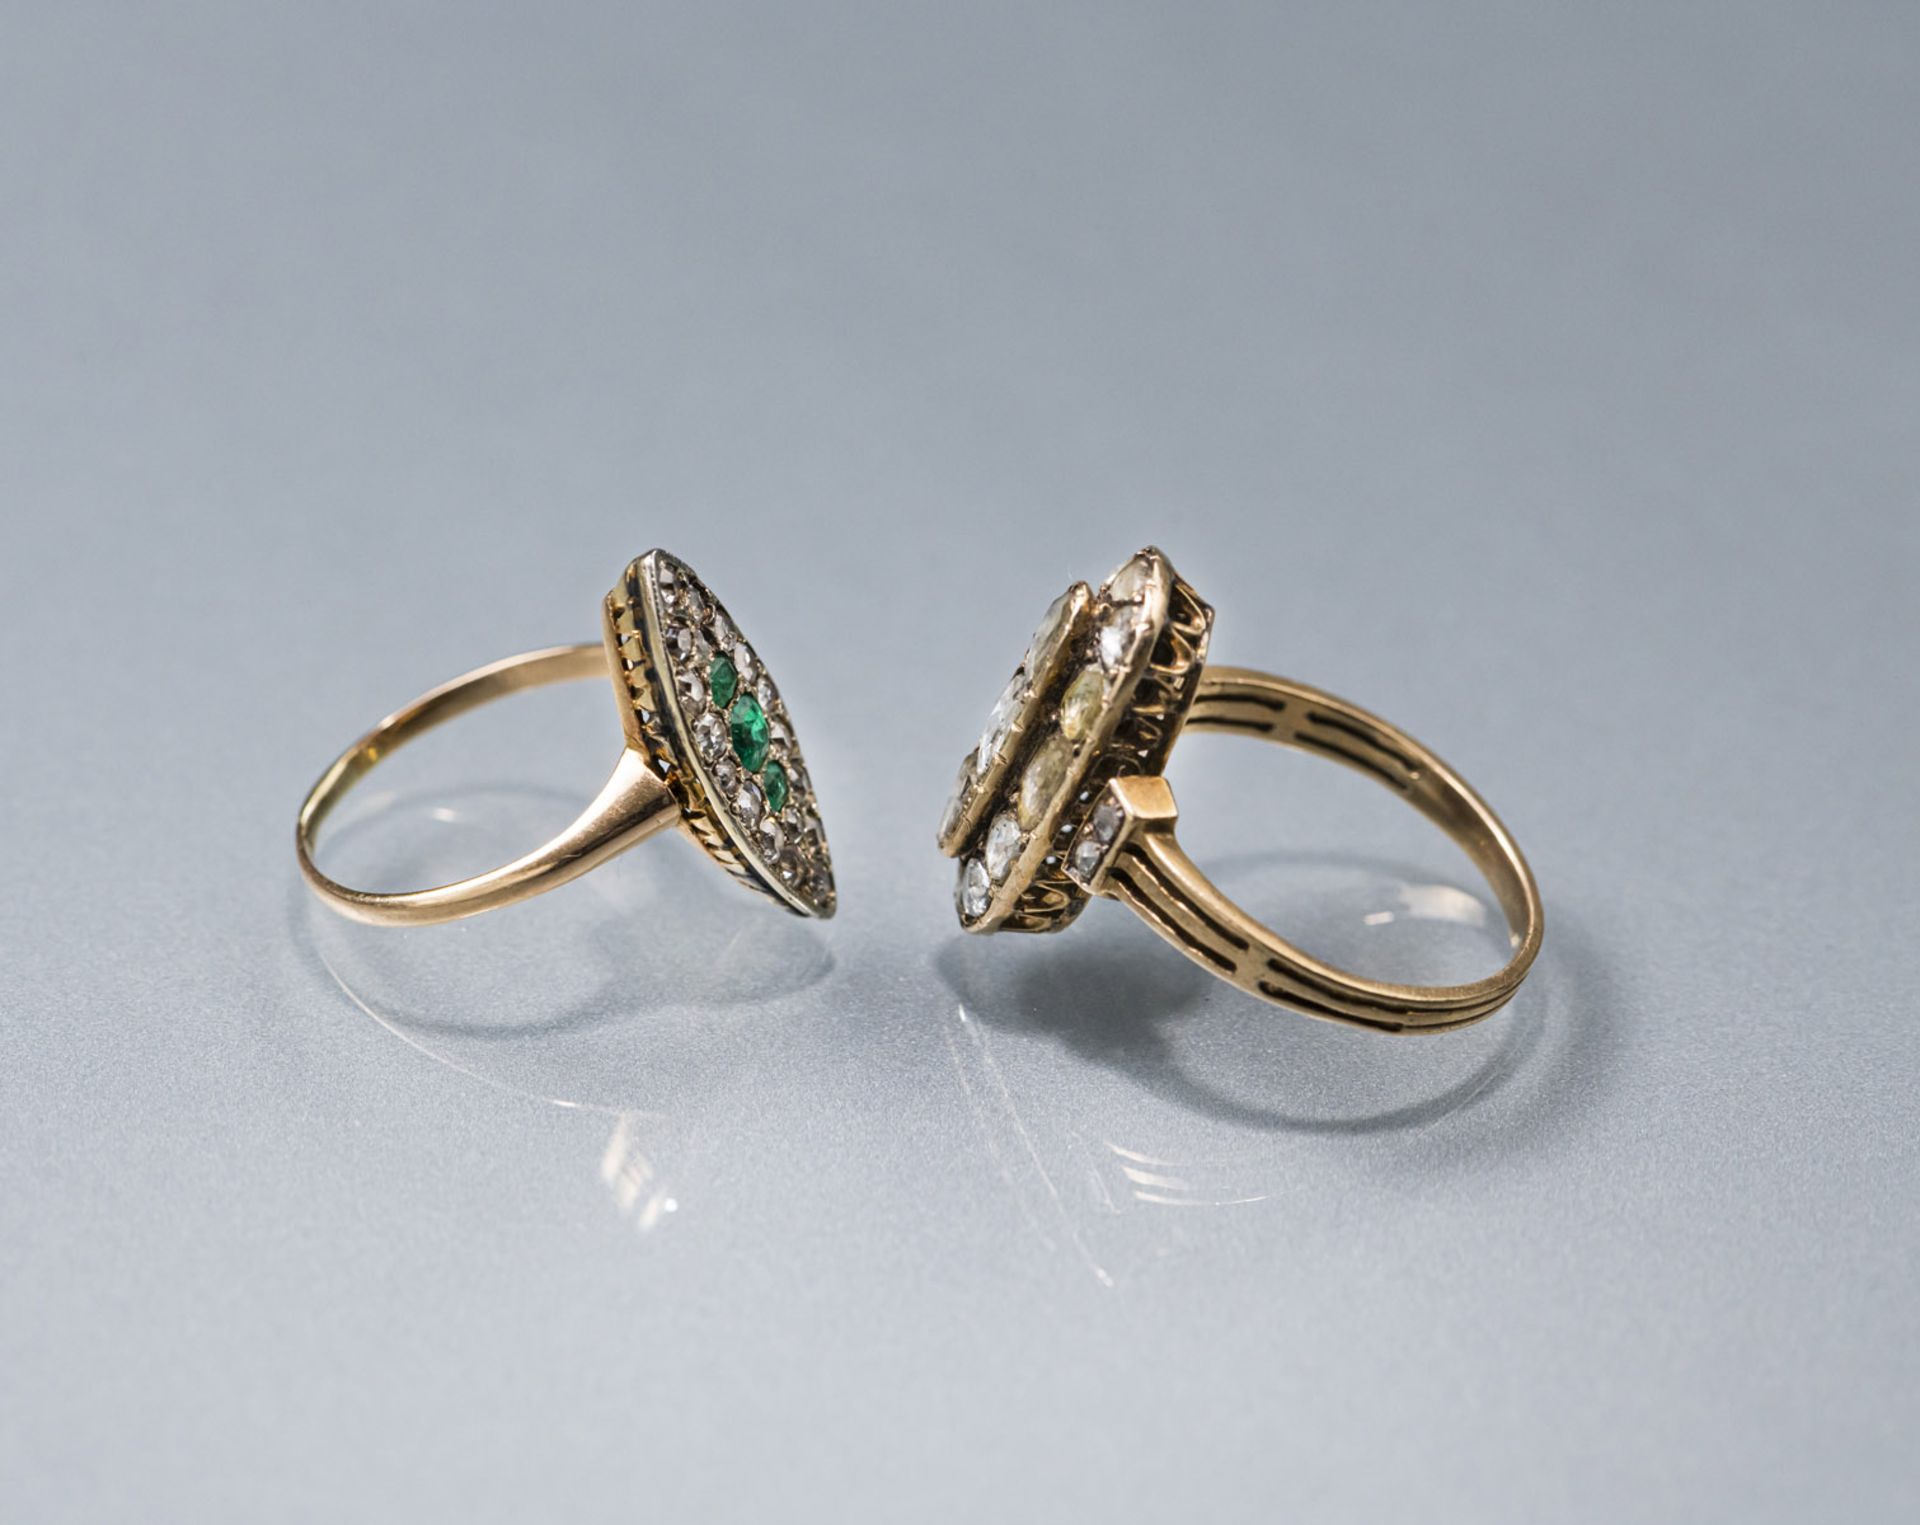 TWO MARQUISE SHAPED RINGS - Image 3 of 3